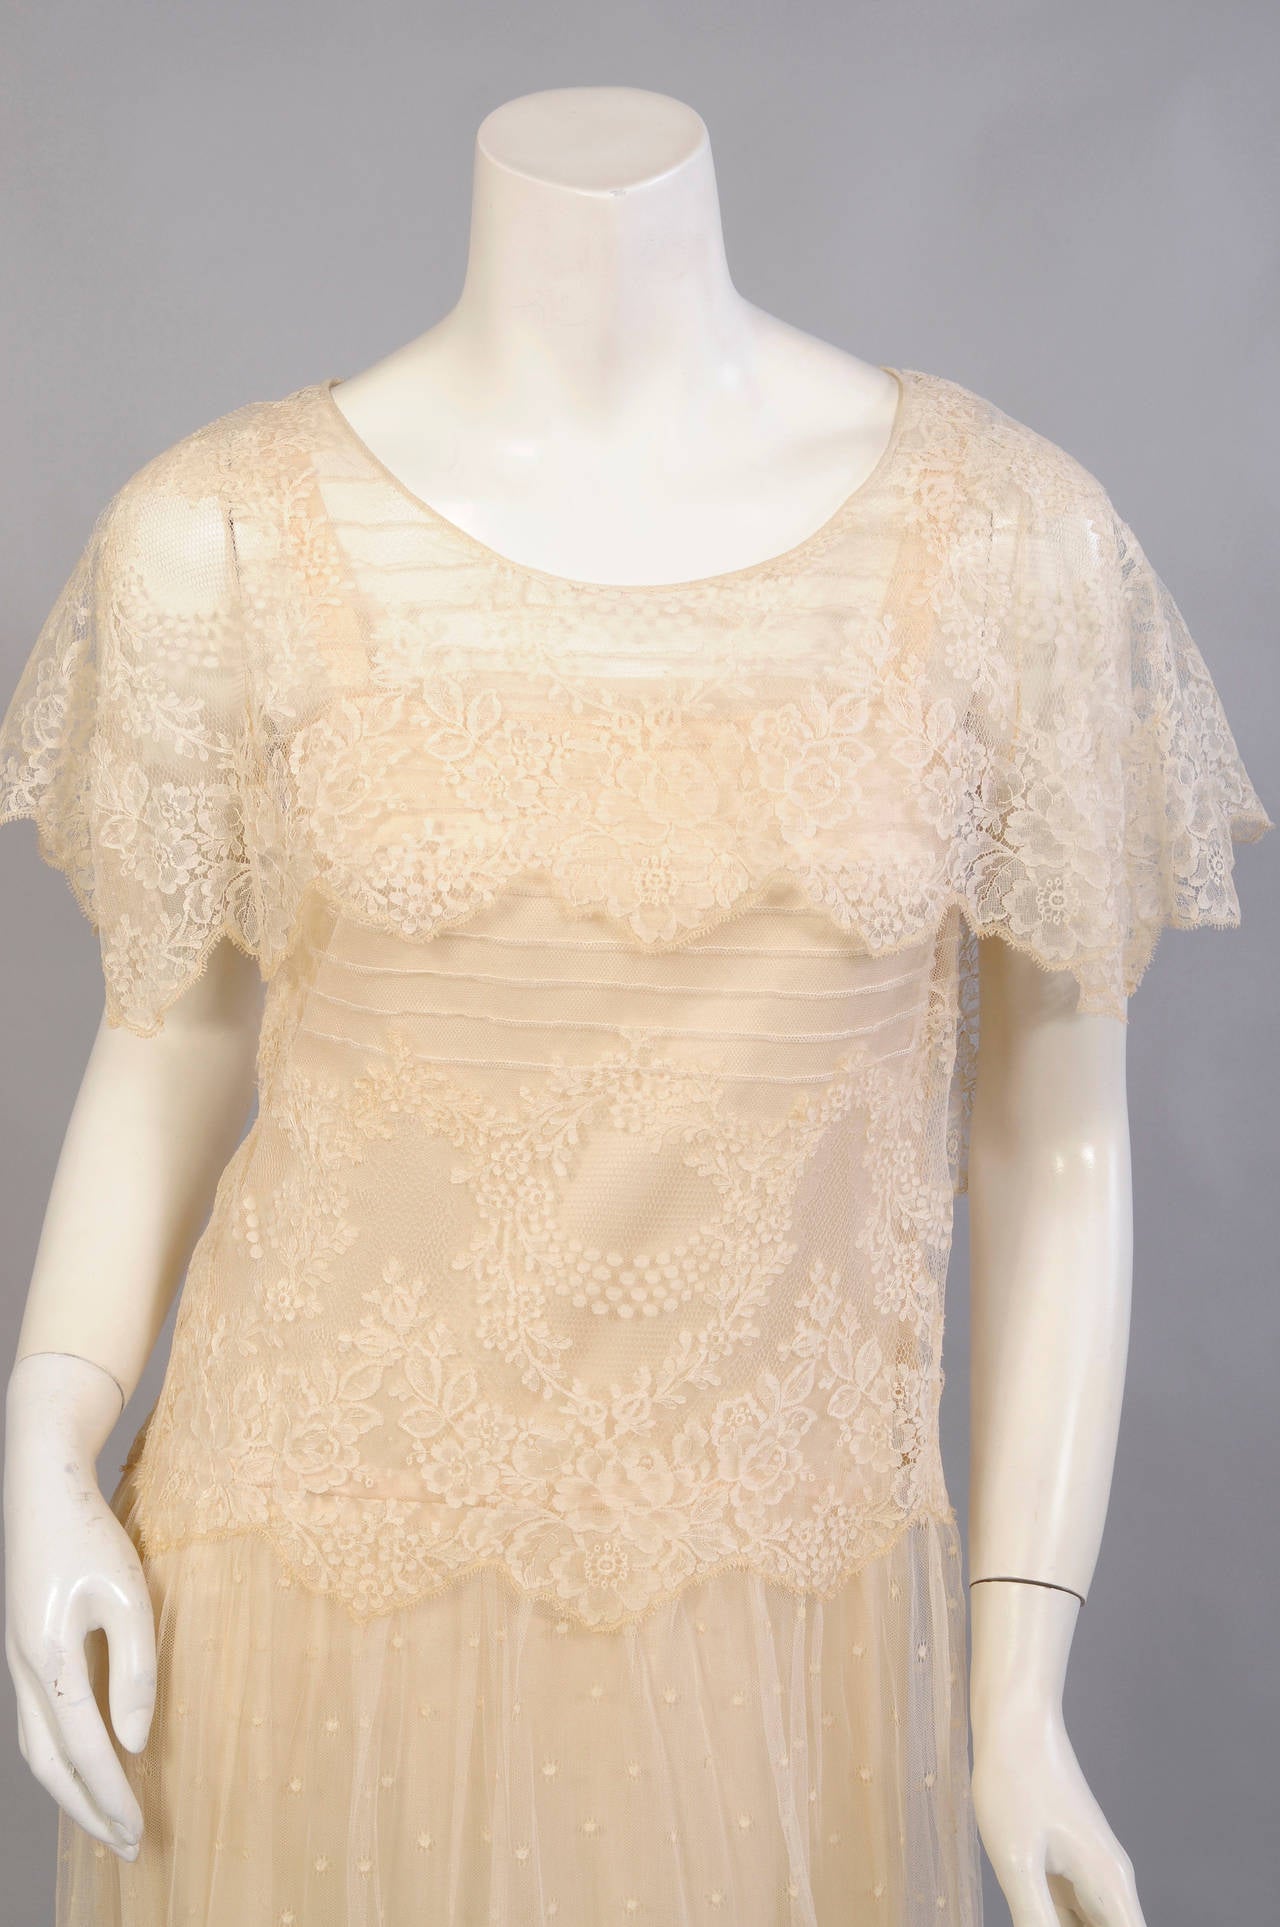 A gorgeous ivory silk charmeuse slip with French seams is the base for this ethereal lace dress.  The bodice is pin tucked horizontally with a large lace collar, dipping to the waist in back. The waist line incorporates the scalloped edge of the